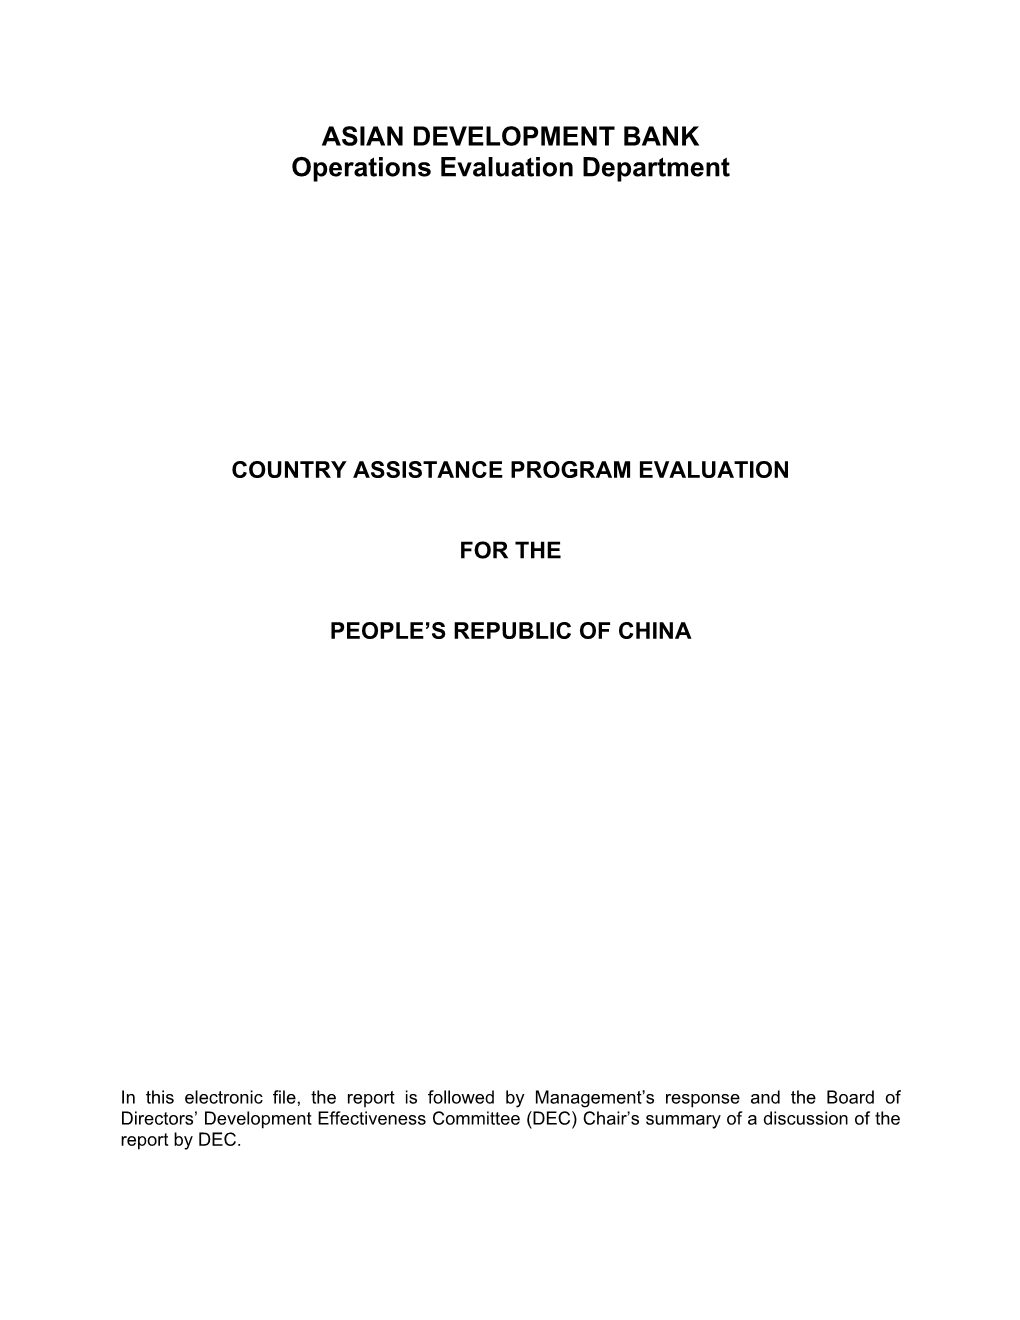 Country Assistance Program Evaluation for the People's